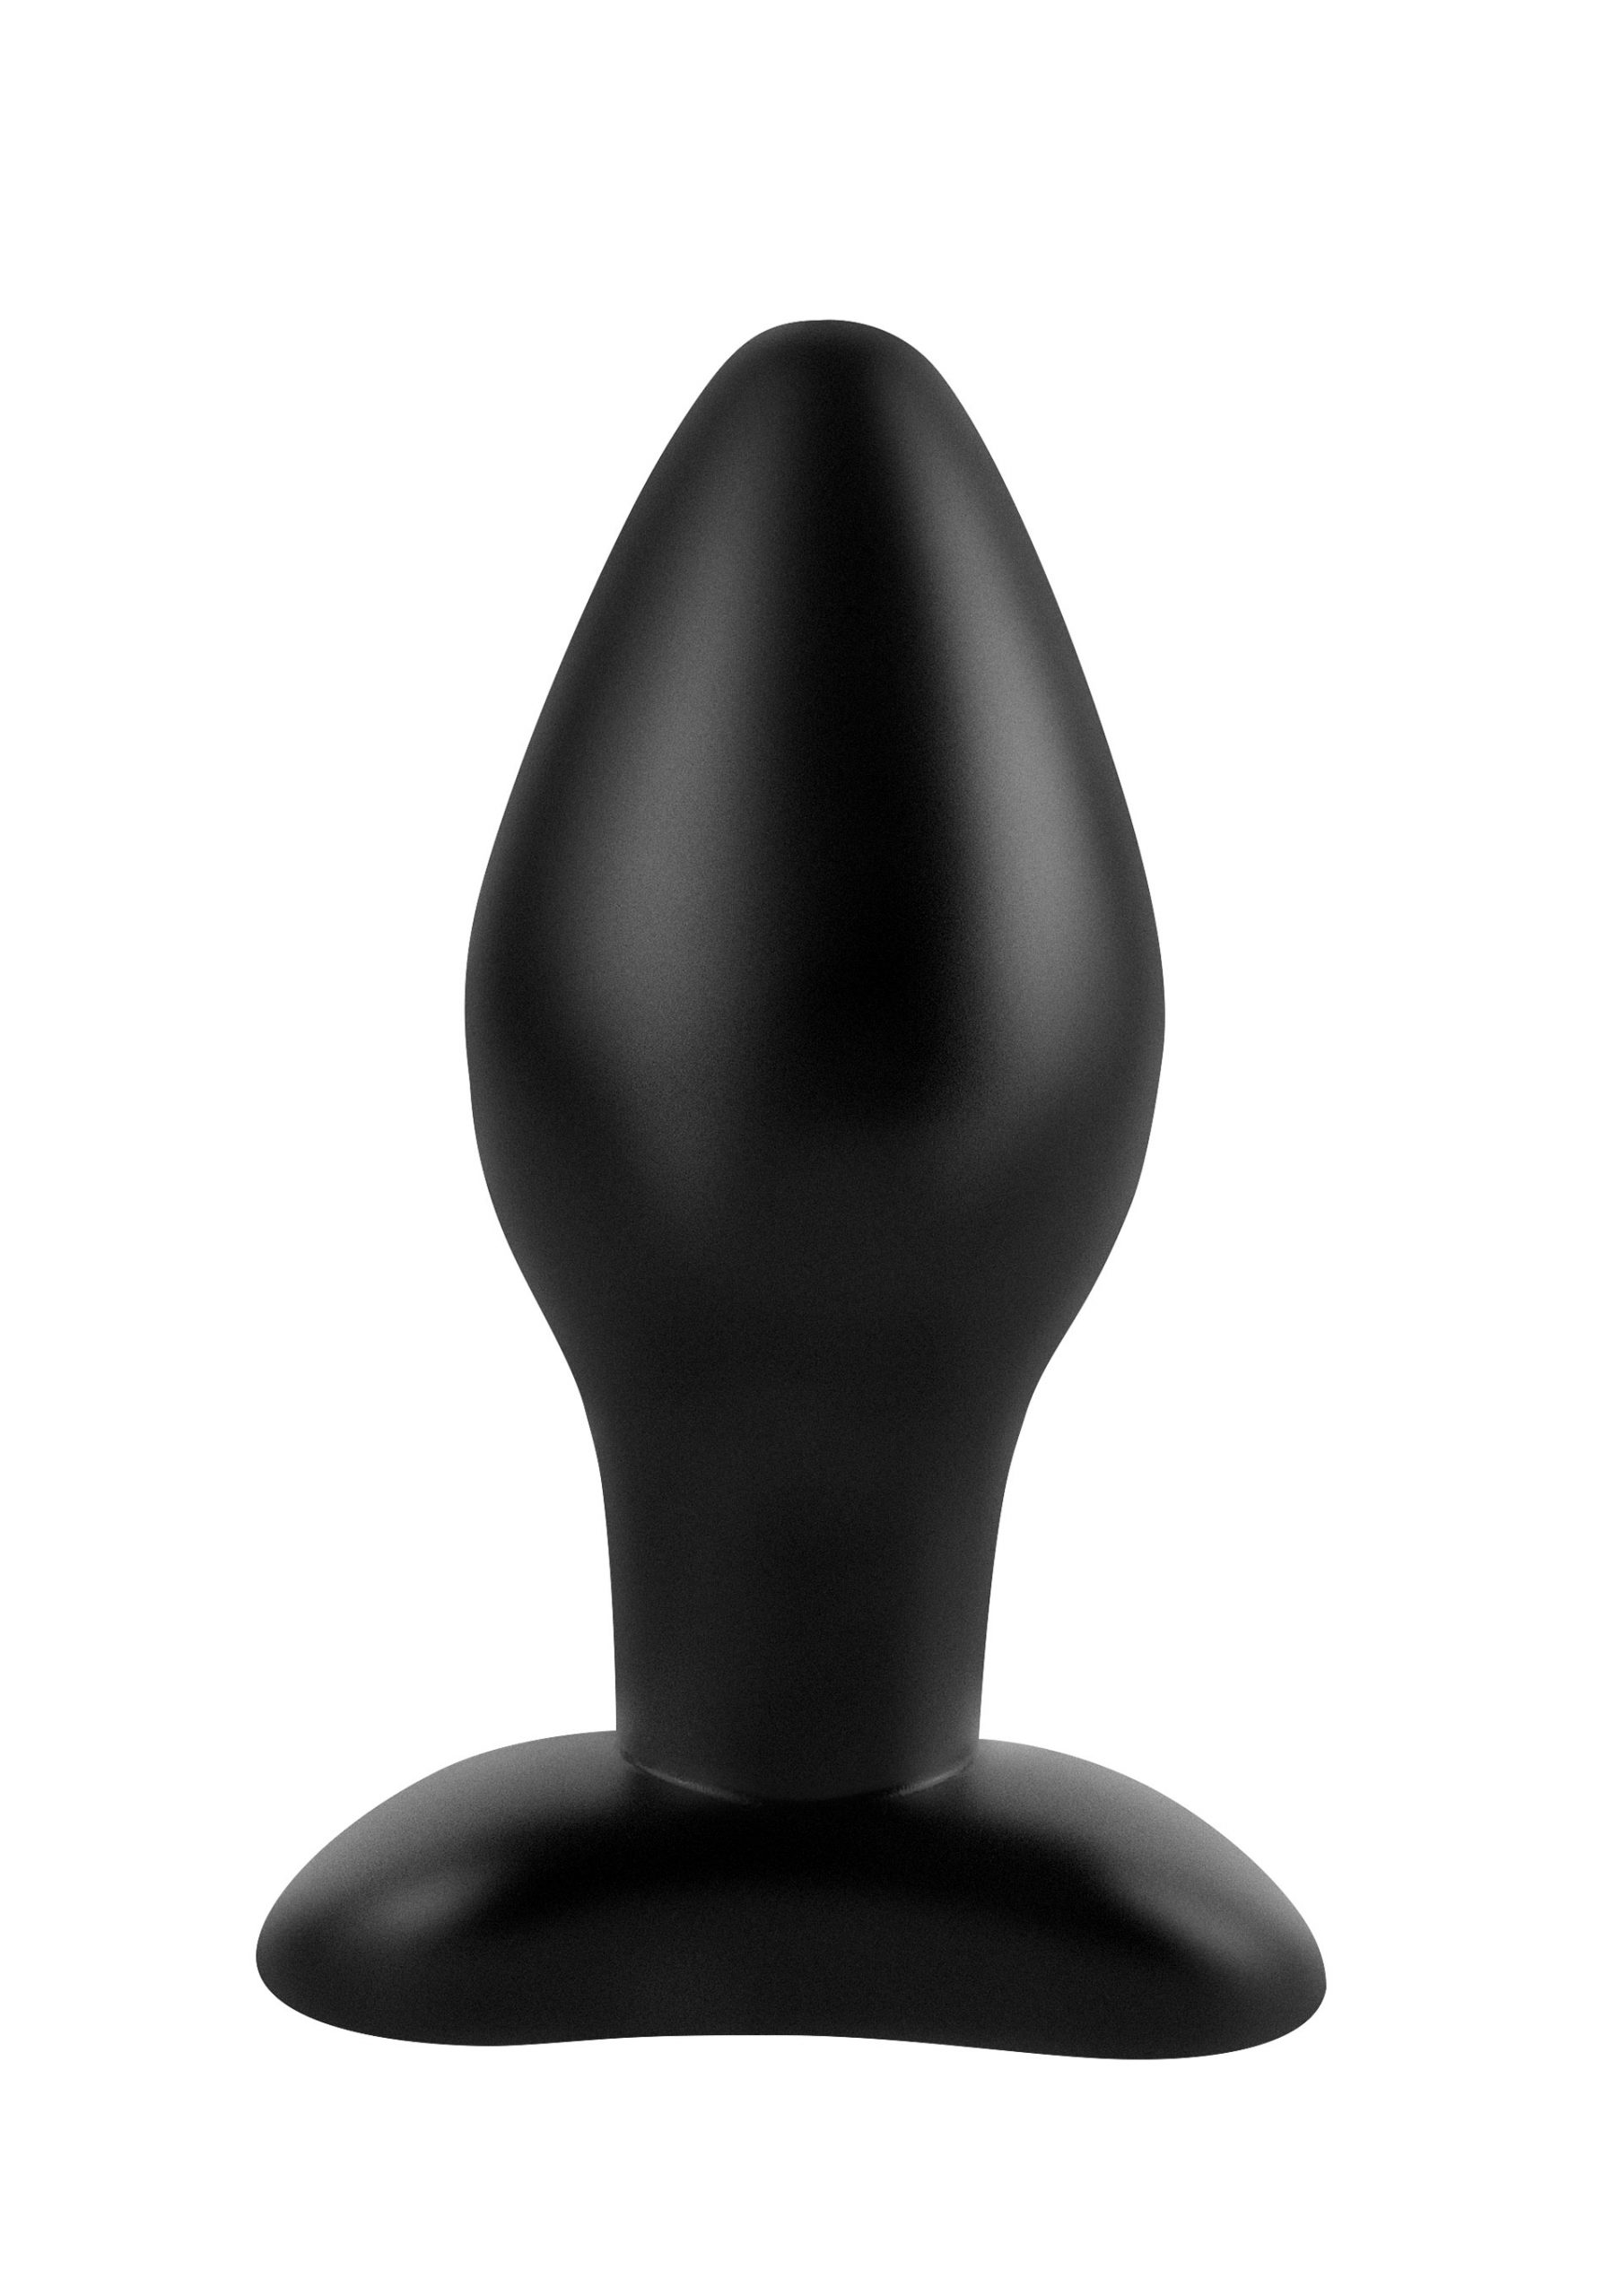 Image of Anal Fantasy Siliconen Buttplug Large - 11 x 5 cm